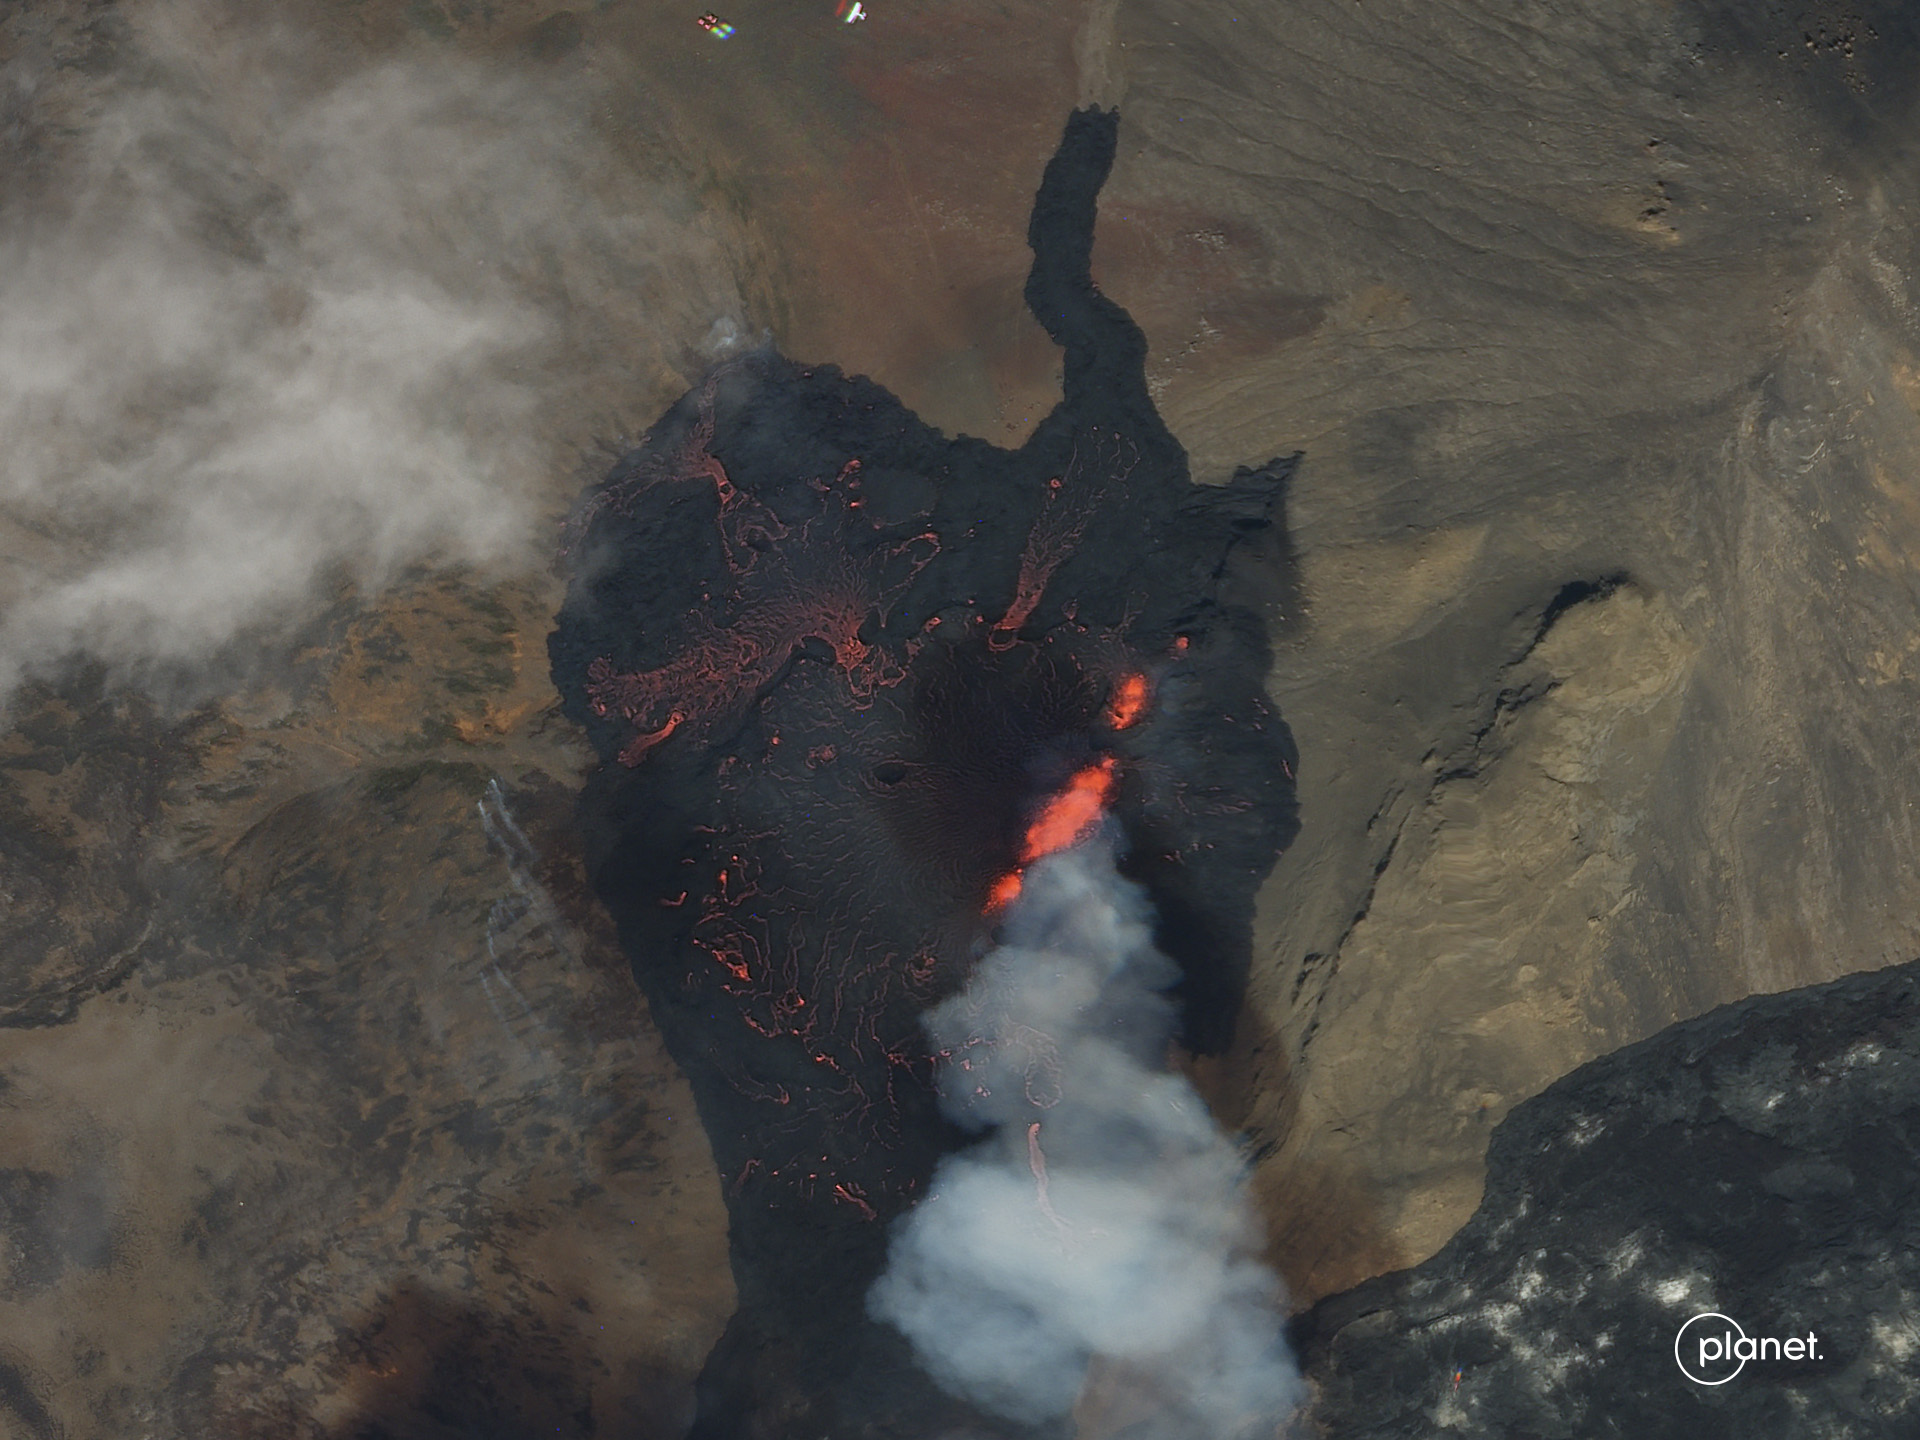 Bird eye view on the lava and lava fountains (image: Planet/twitter)